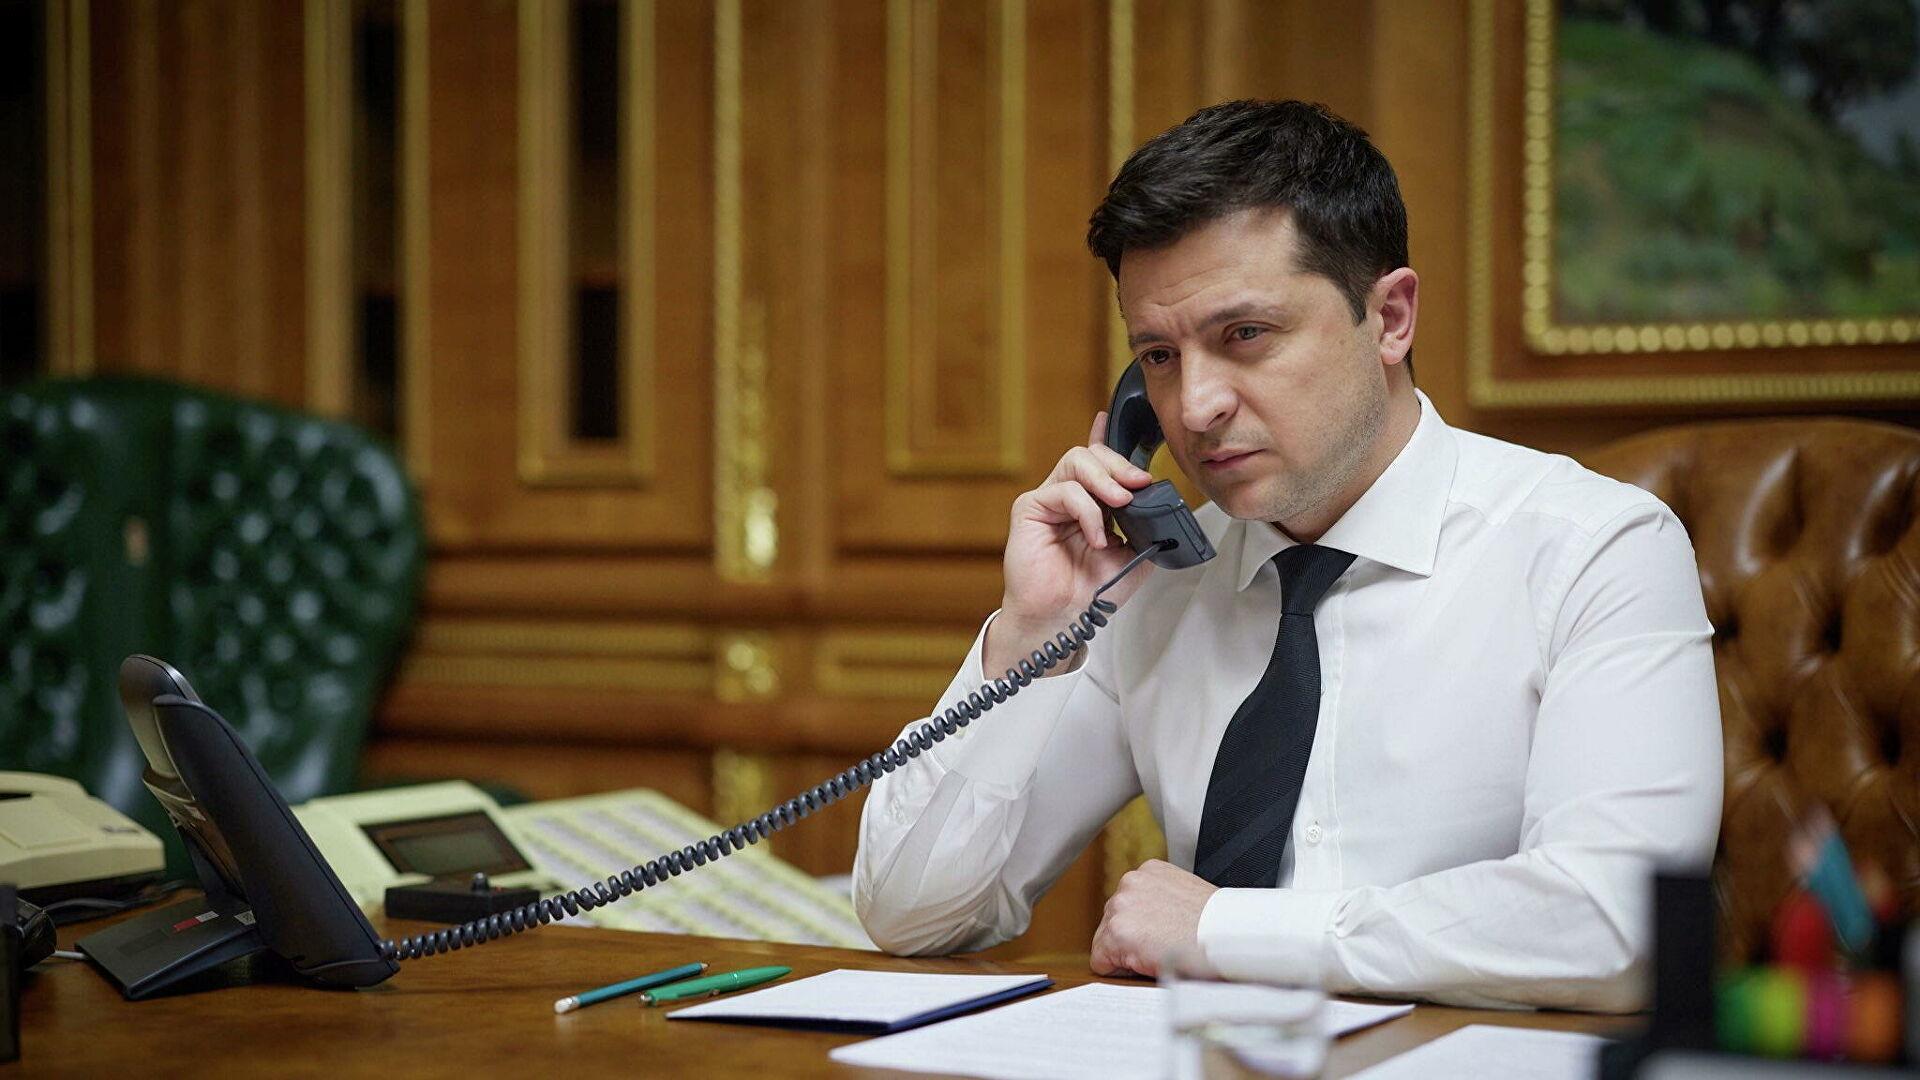 Eve.calls joined Volodymyr Zelensky's initiative and delivered a phone message of peace to the Russians